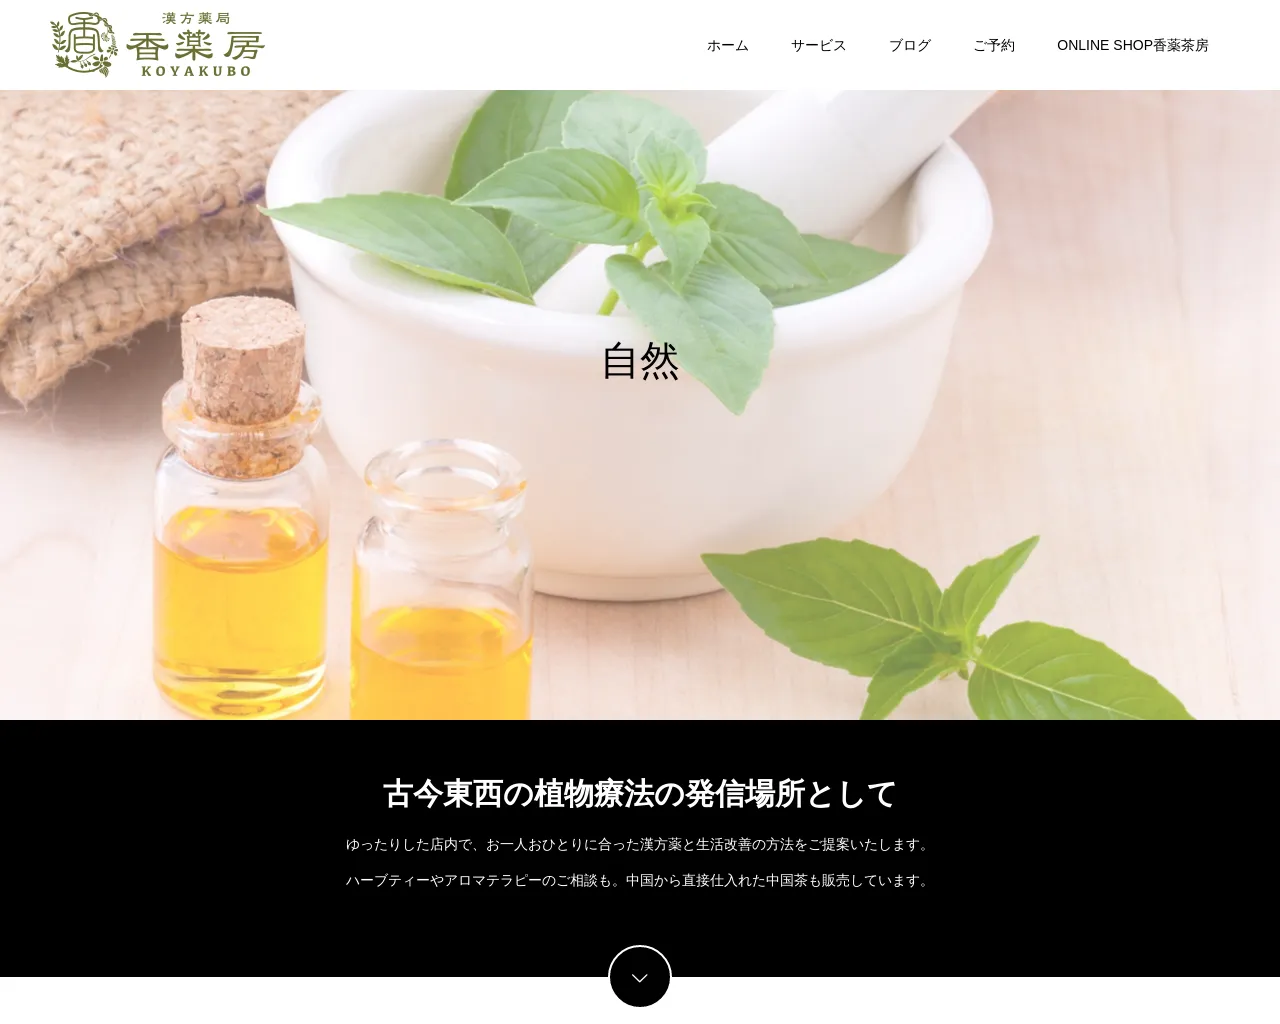 Chinese medicine pharmacy incense shop site